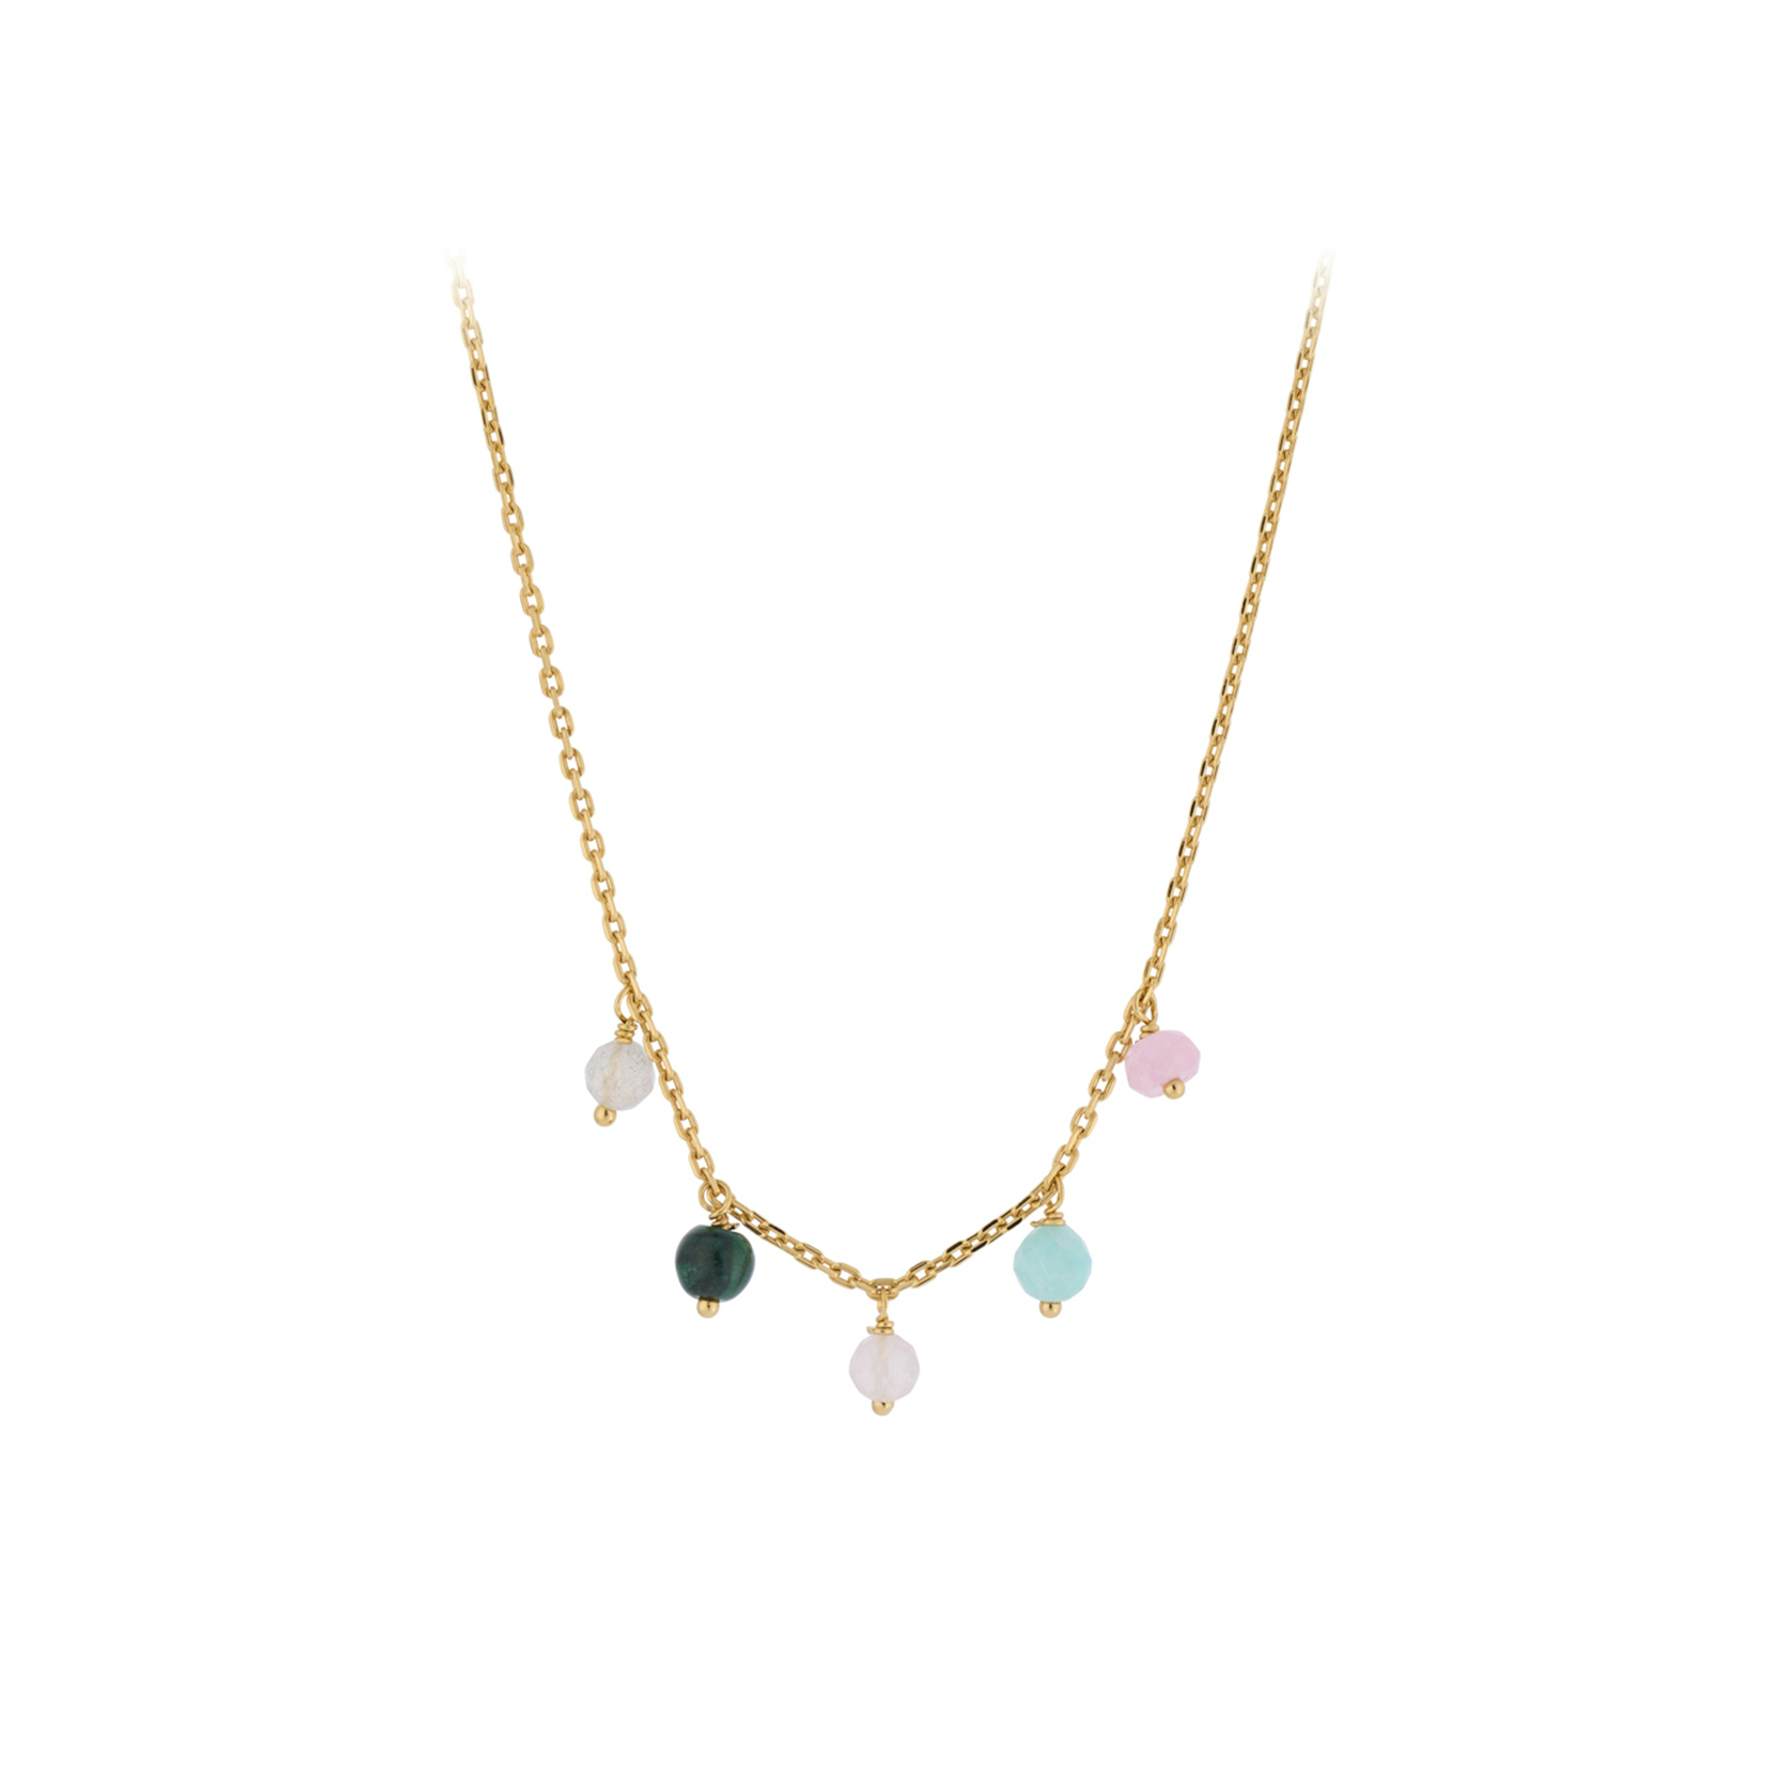 Harmony Necklace from Pernille Corydon in Goldplated-Silver Sterling 925